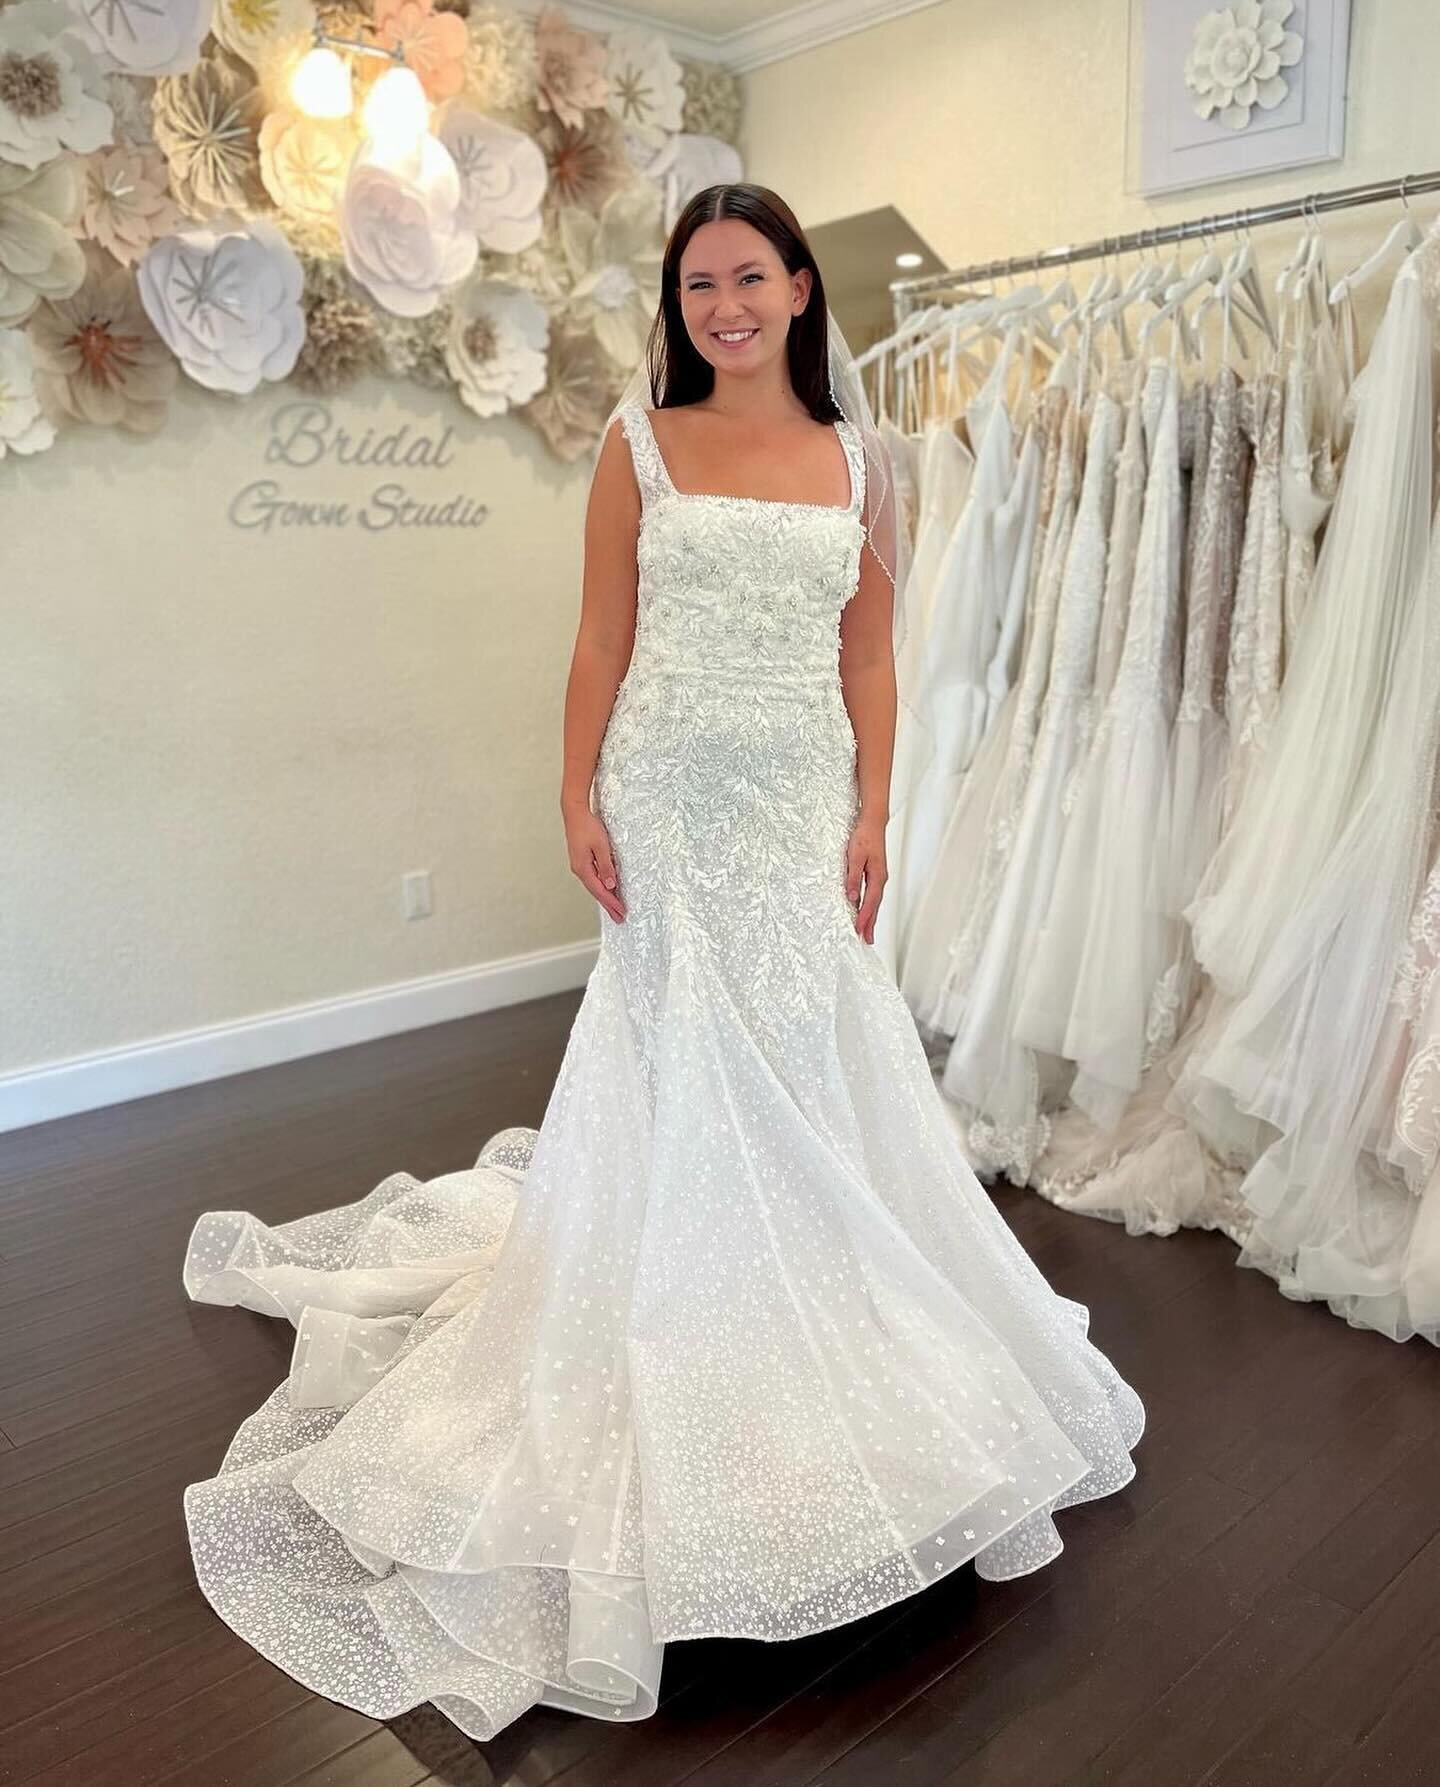 We love the latest square-neck line trend! 🤍 

This stunning pearl trimmed neckline is flattering many body types and creates a timeless and classic look ✨

Book your appointment online to try on in our studio! 

#bgsbride #weddingdress #orlandobrid